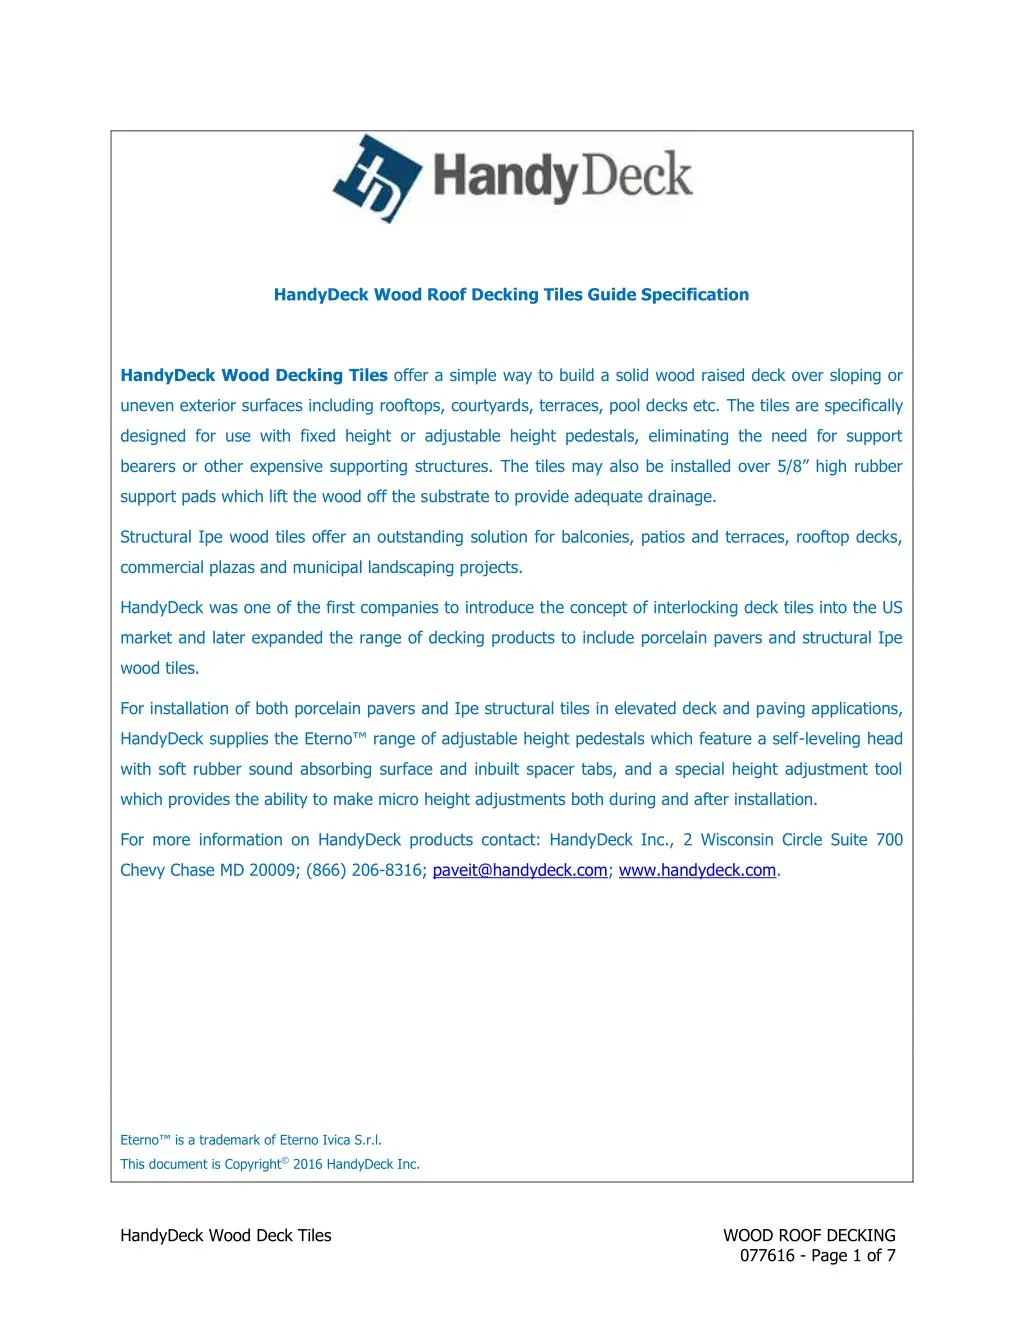 handydeck wood roof decking tiles guide